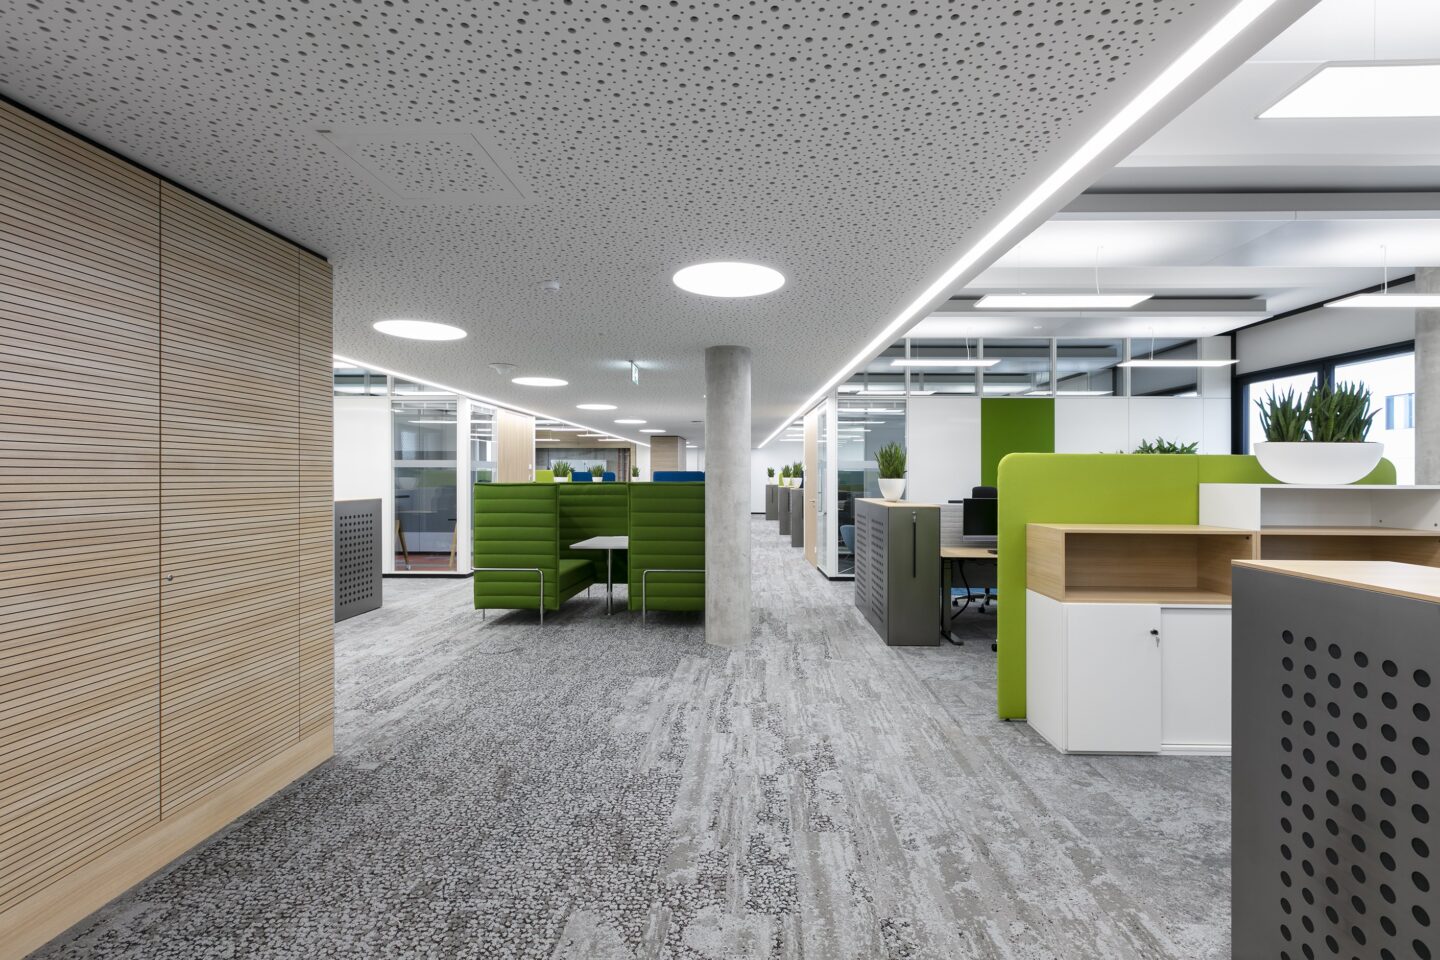 feco-feederle│partition wall systems│Fiducia, Karlsruhe